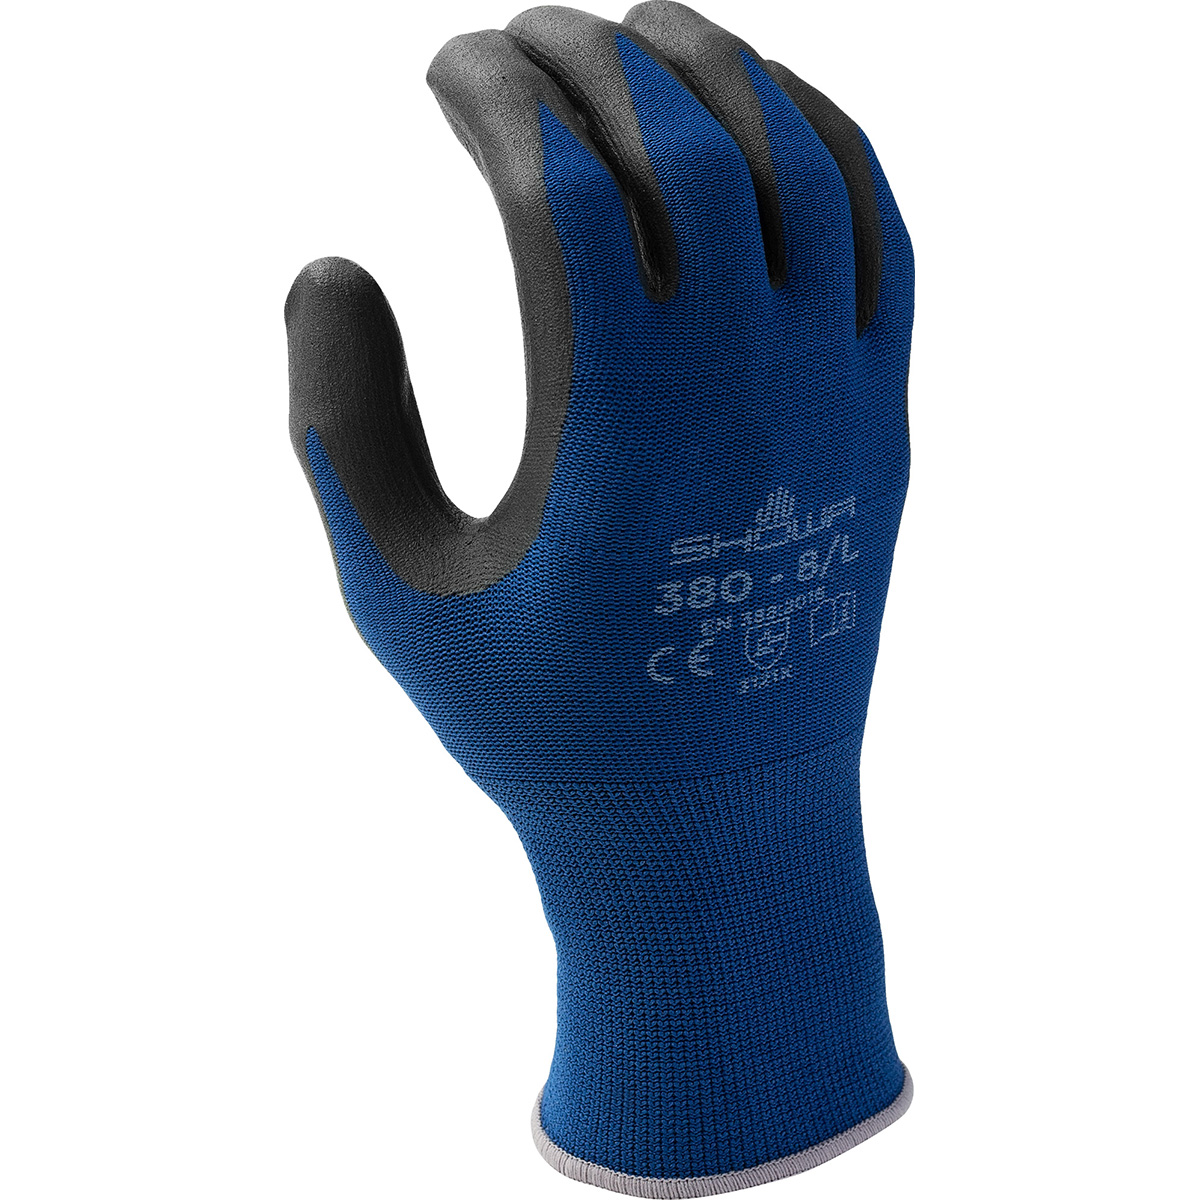 General purpose patented waffle pattern foamed nitrile-coated, palm dipped, blue w/black coating, 13 gauge seamless, knitted liner, small